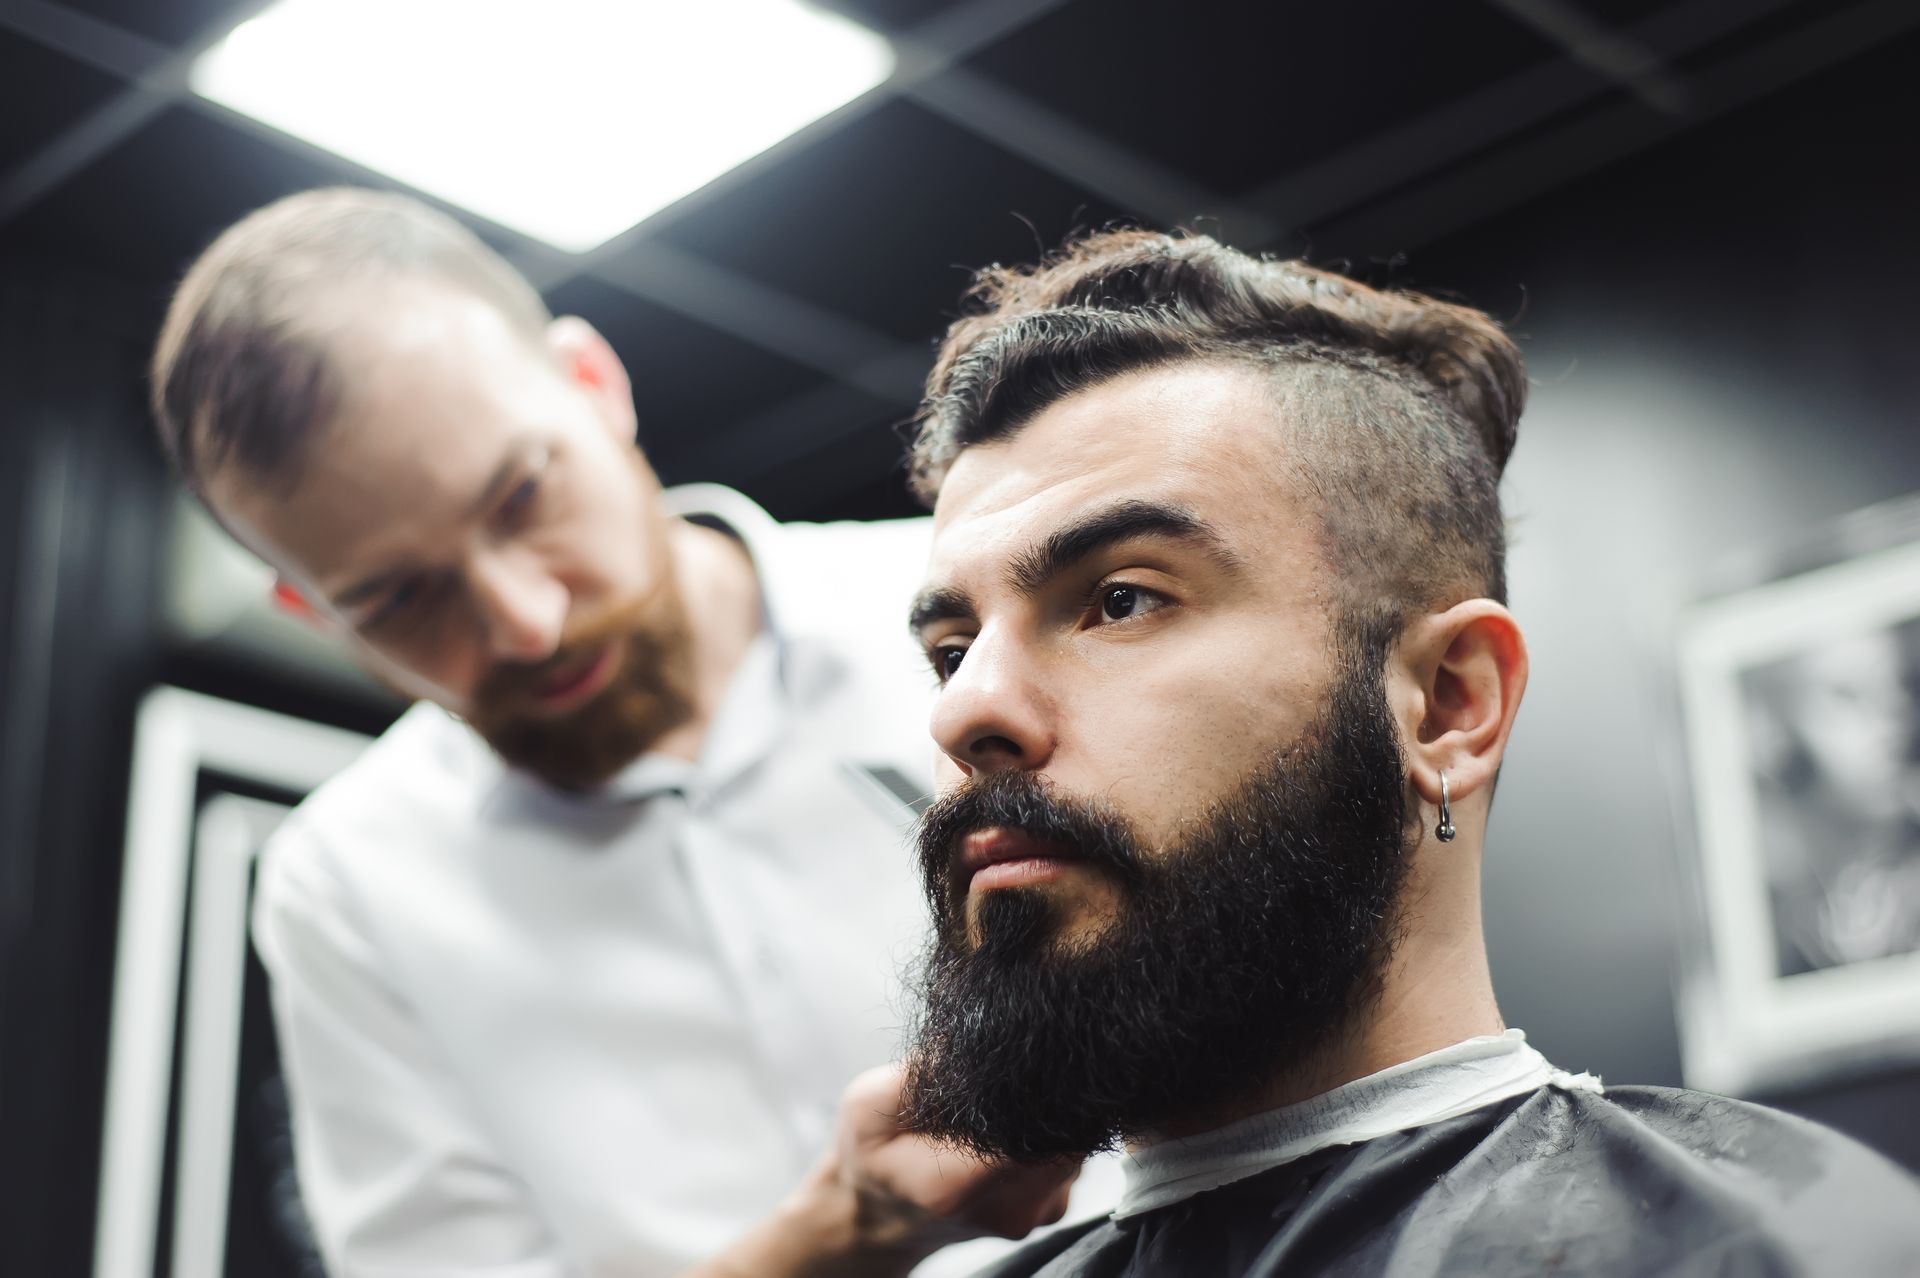 A man with a beard is getting his hair cut by a barber in a barber shop.